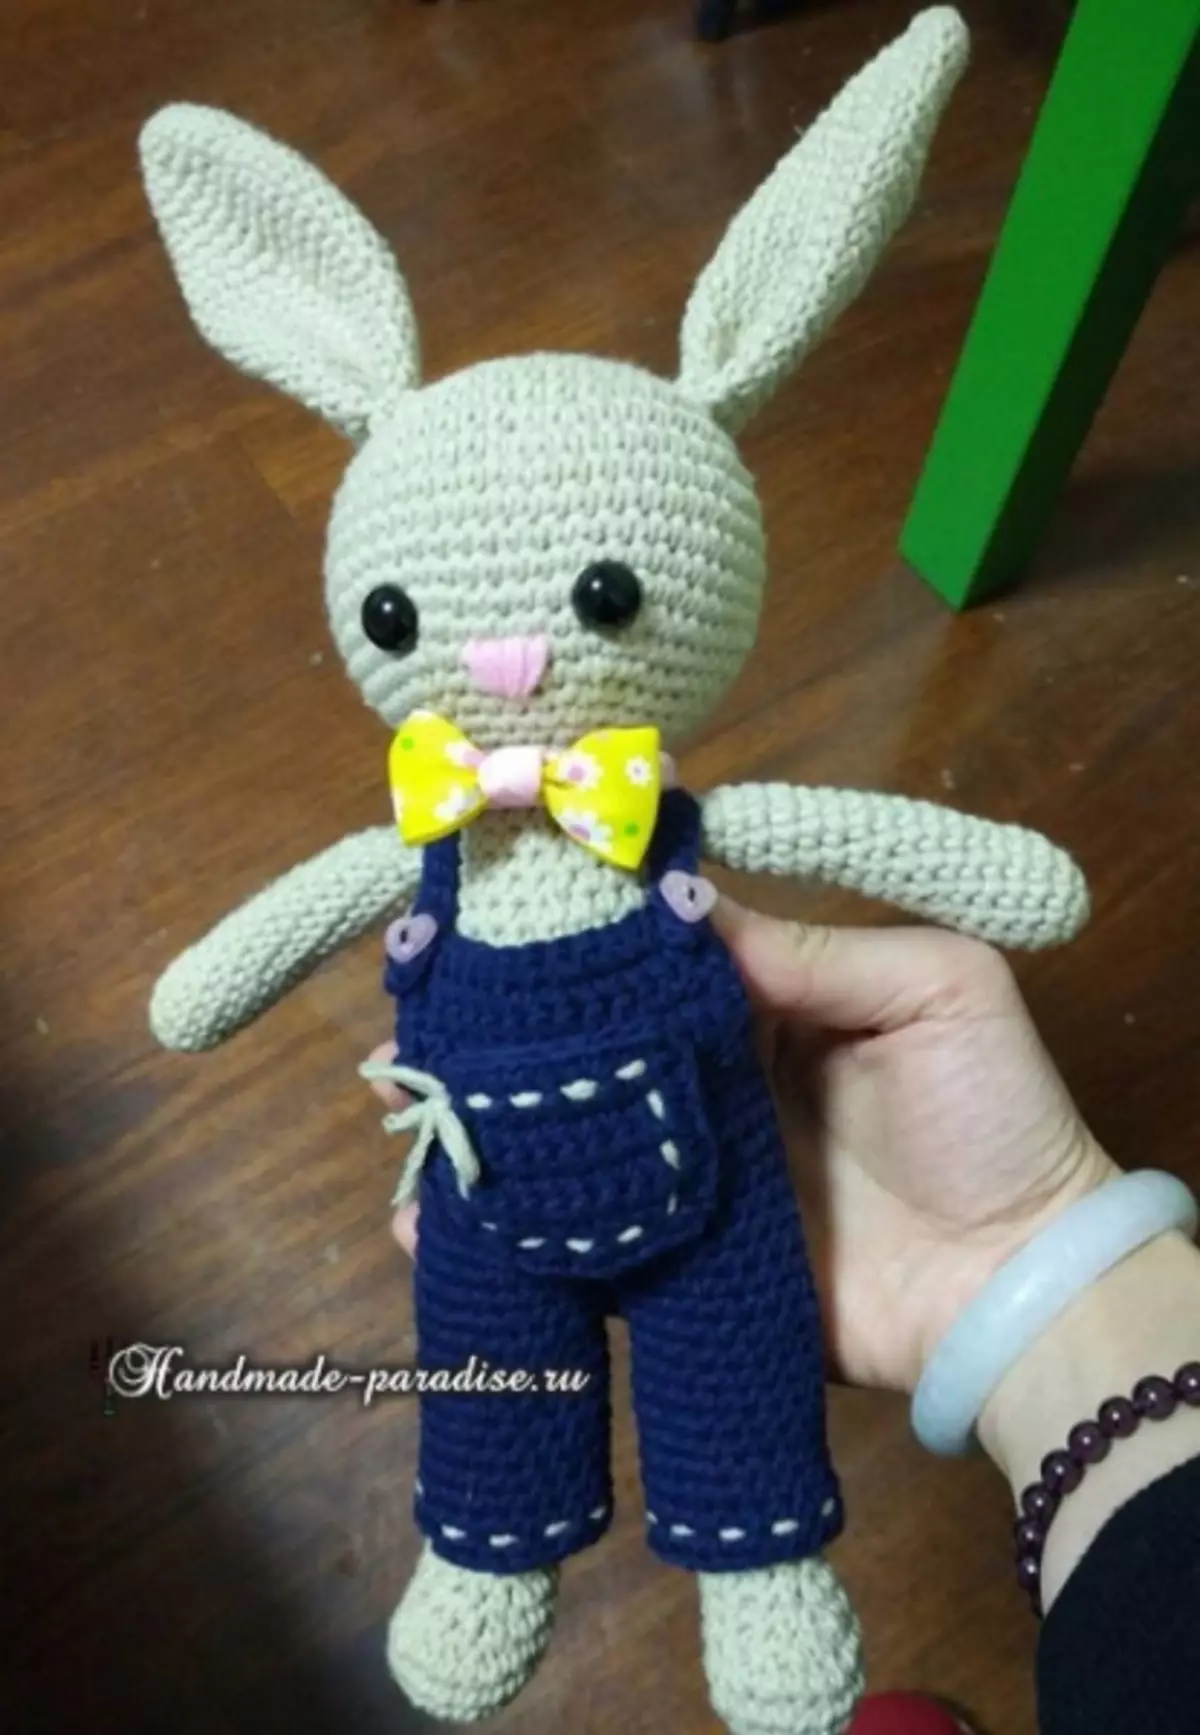 Knit crocheted eared hares and rabbits